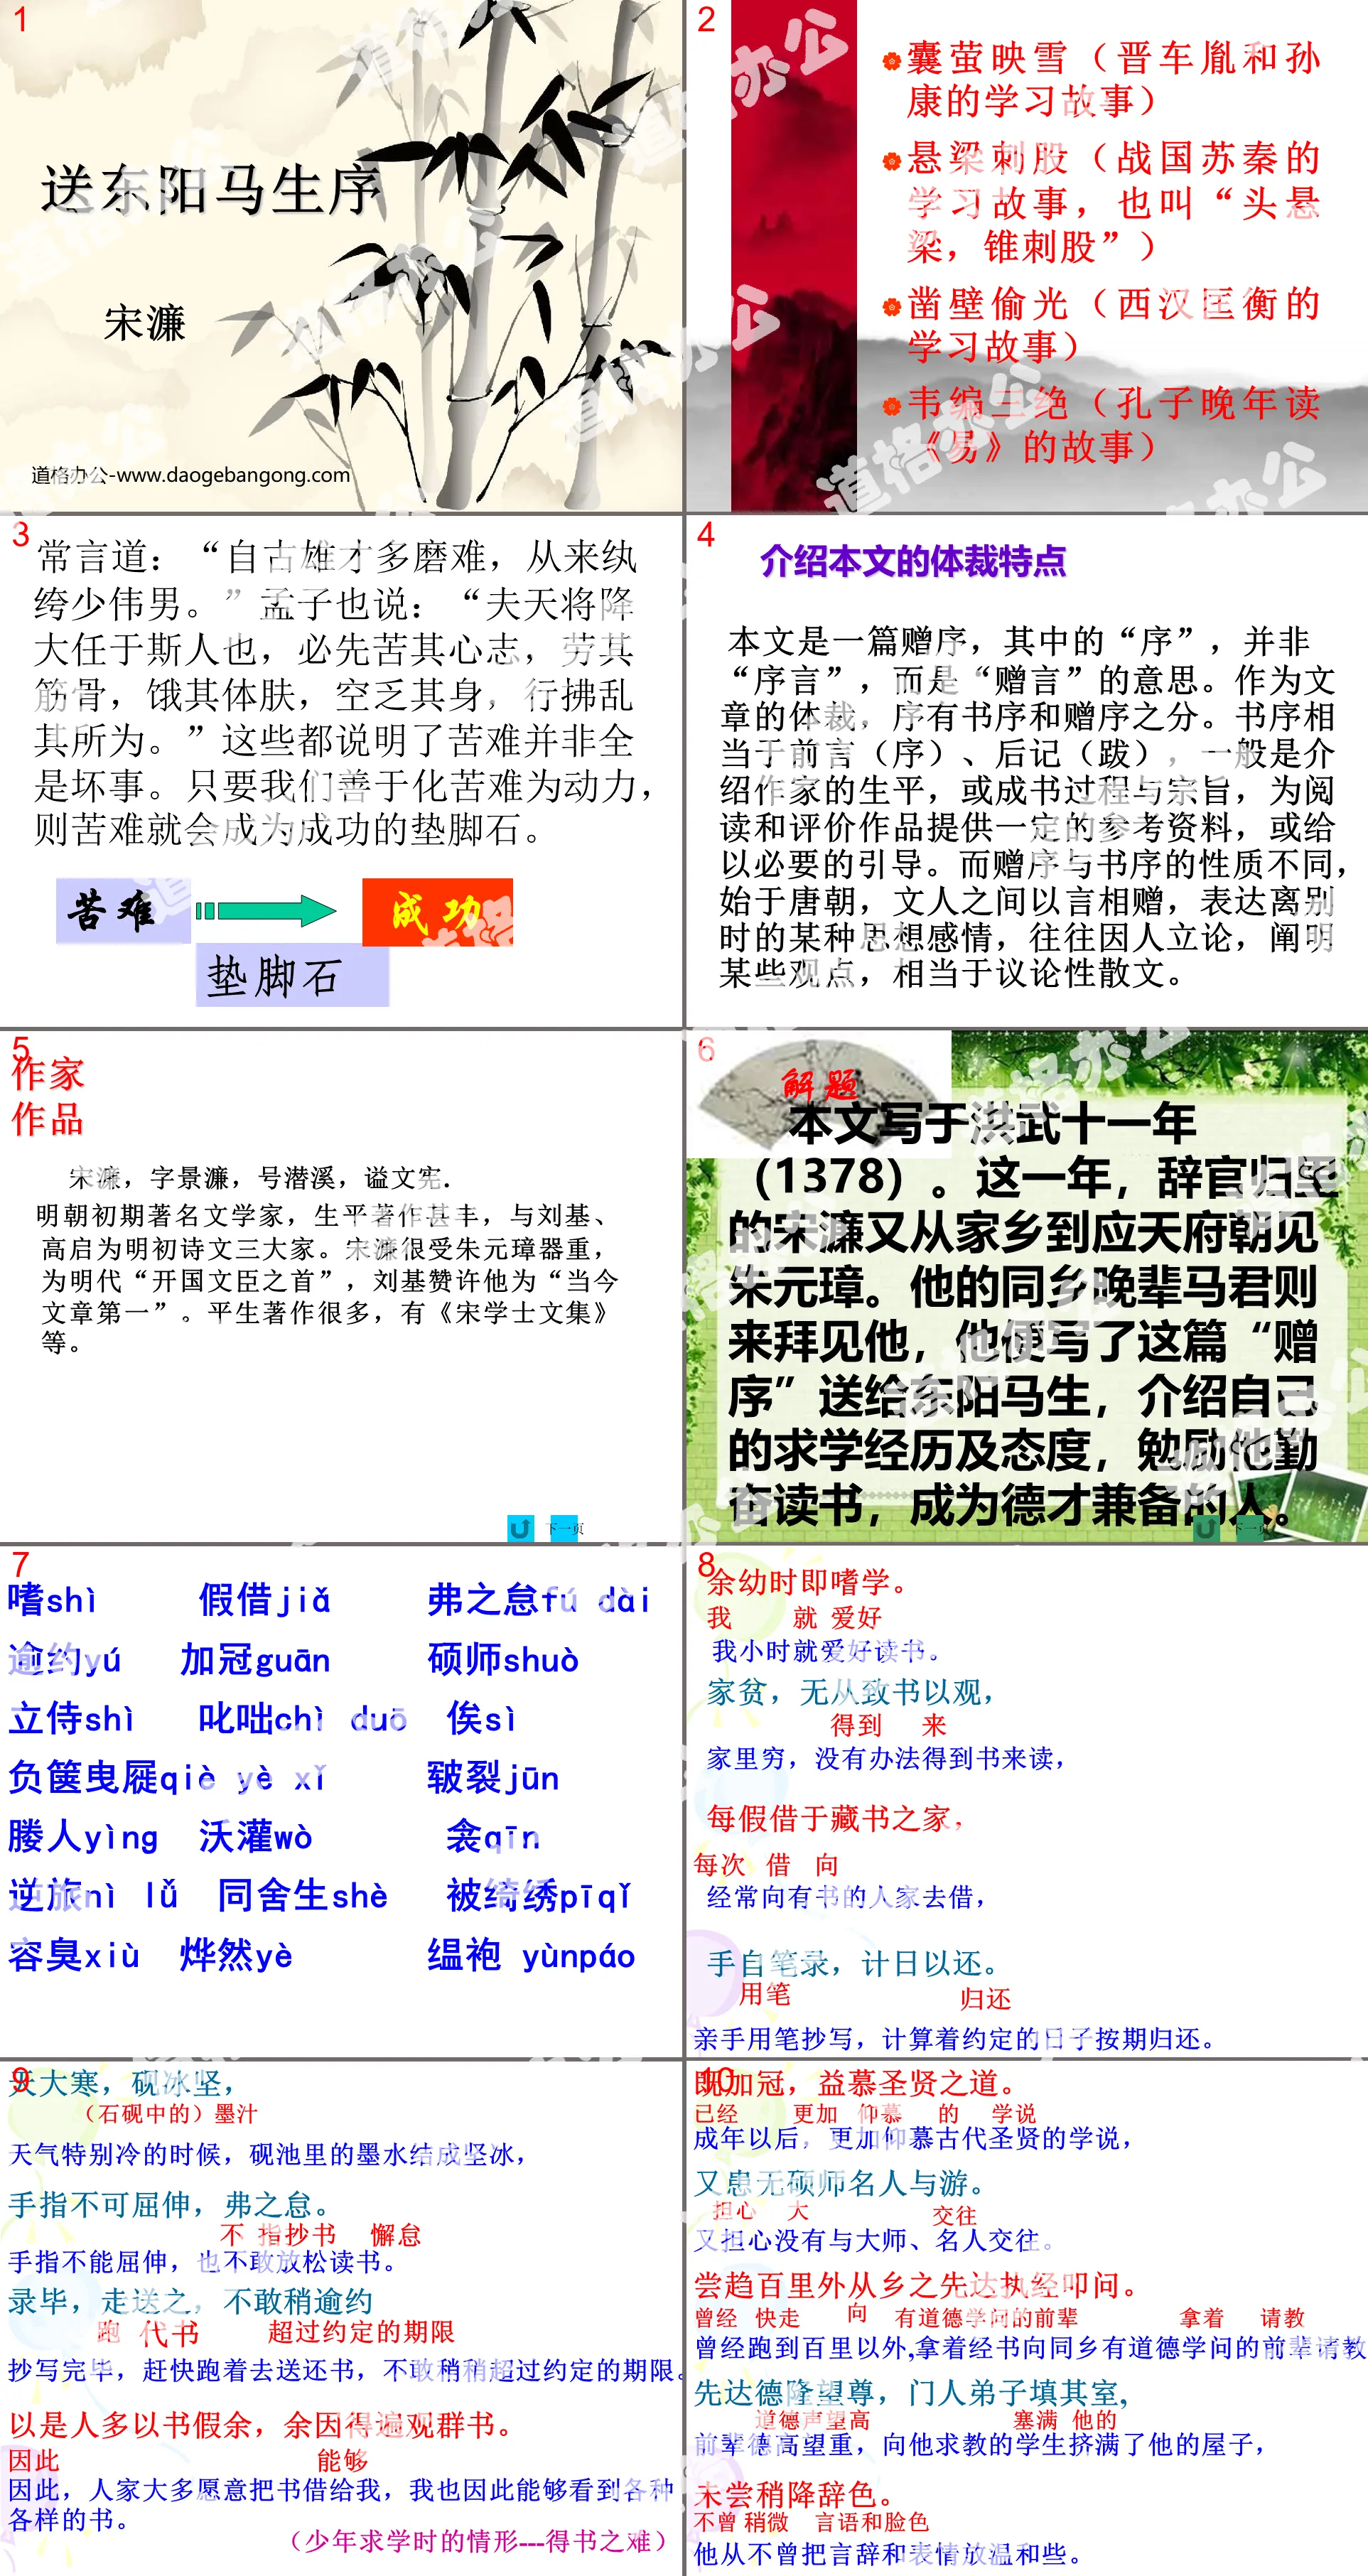 "Preface to Dongyang Ma Sheng" PPT courseware 4